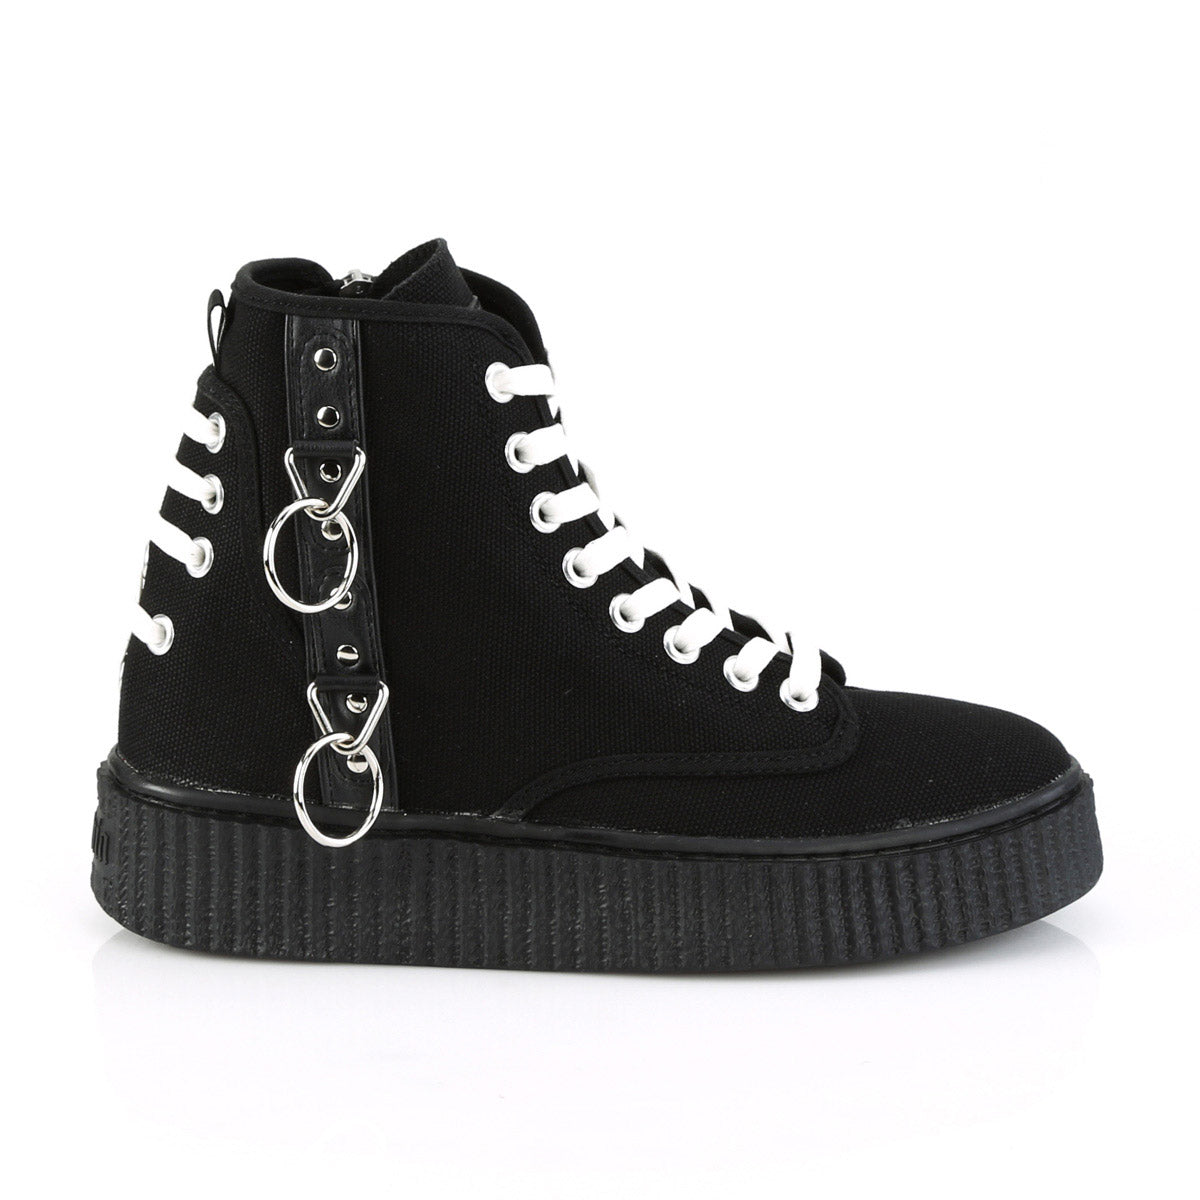 1 1/2" PF Round Toe Lace-Up Front High Top Creeper Sneaker Pleaser Demonia SNEEKER/256